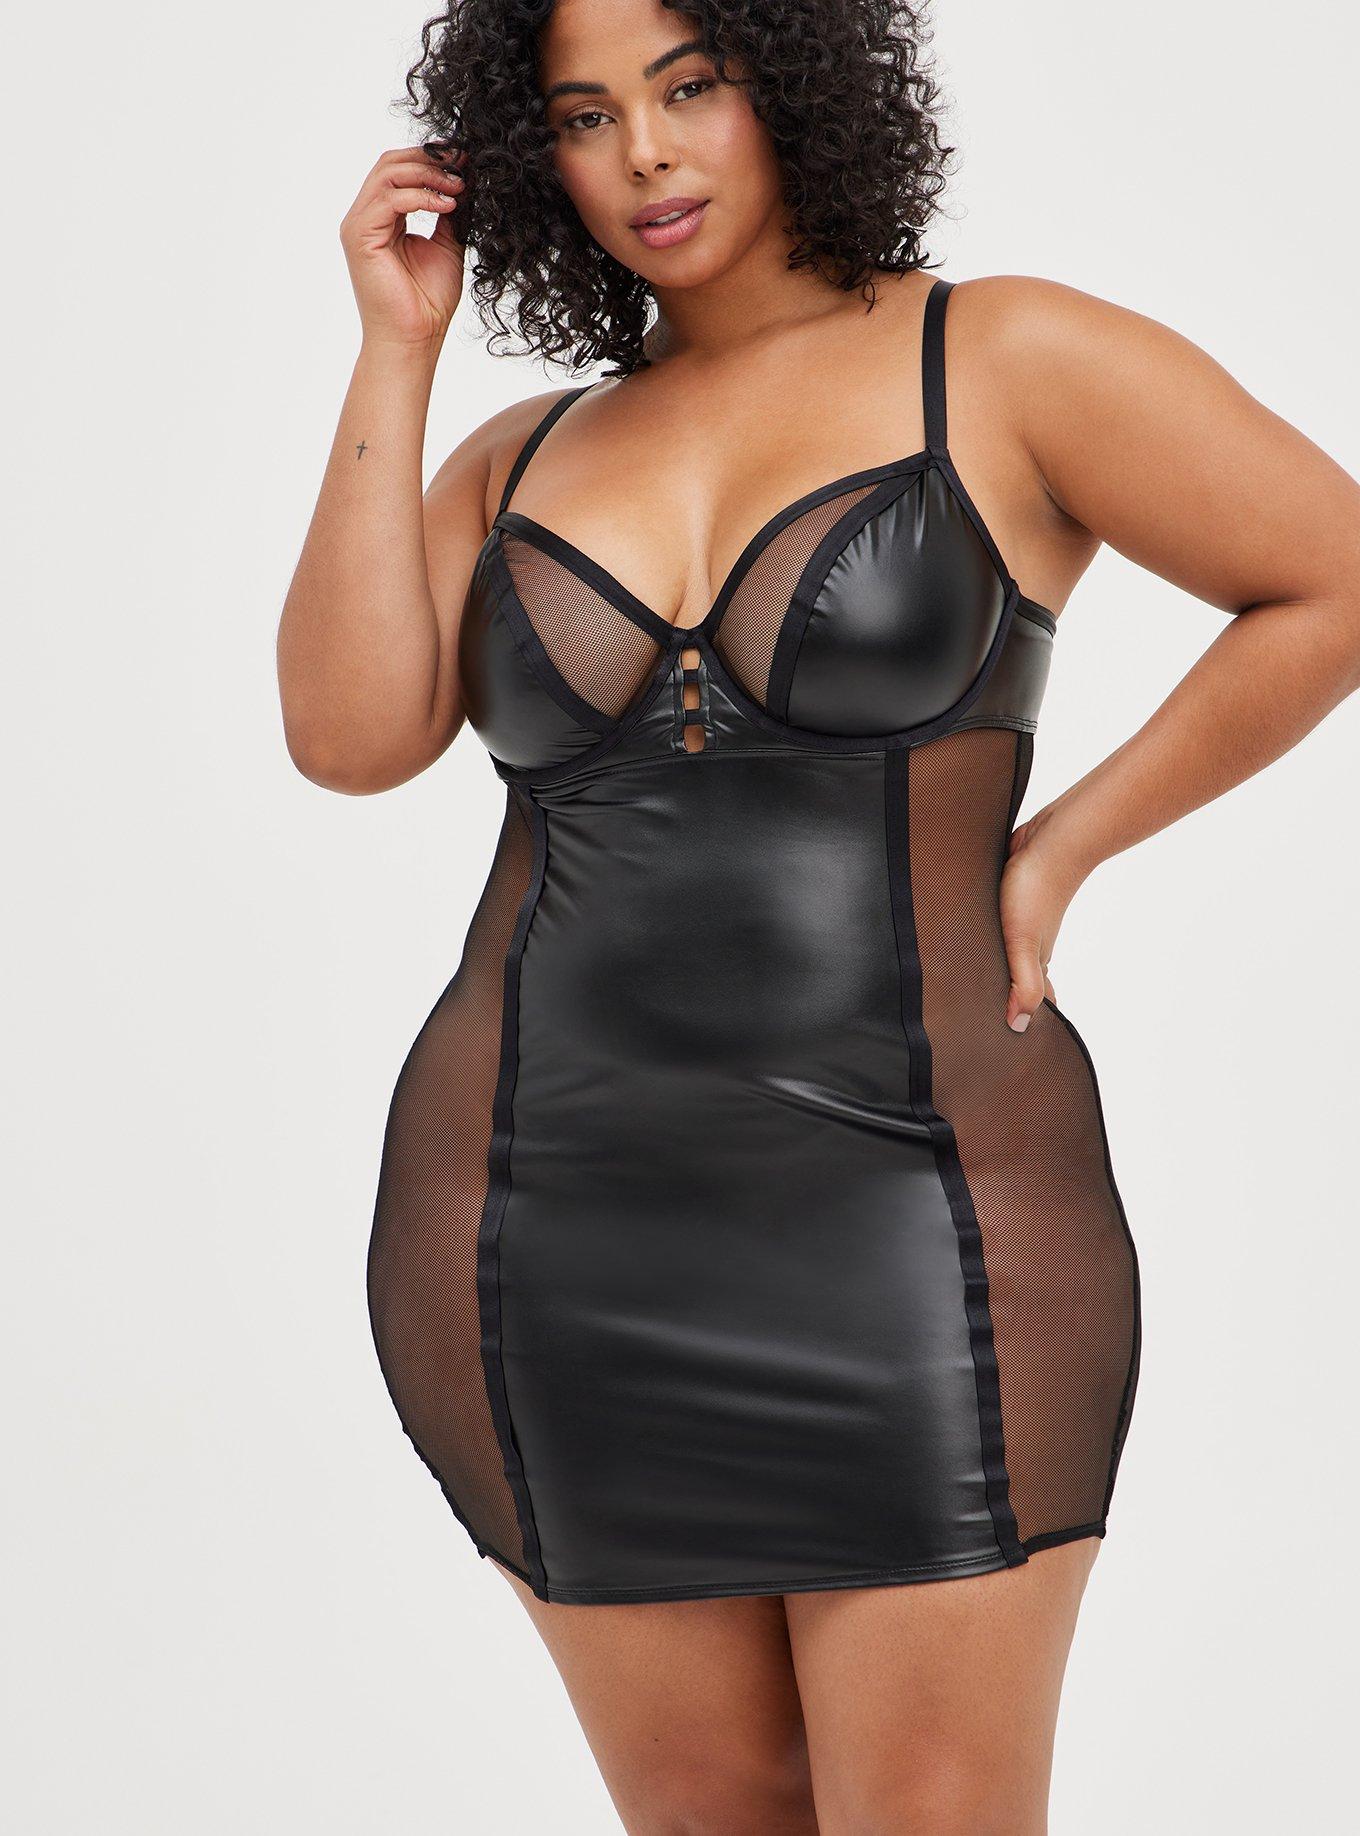 shop discount Torrid Strappy Faux Leather & Mesh Underwire